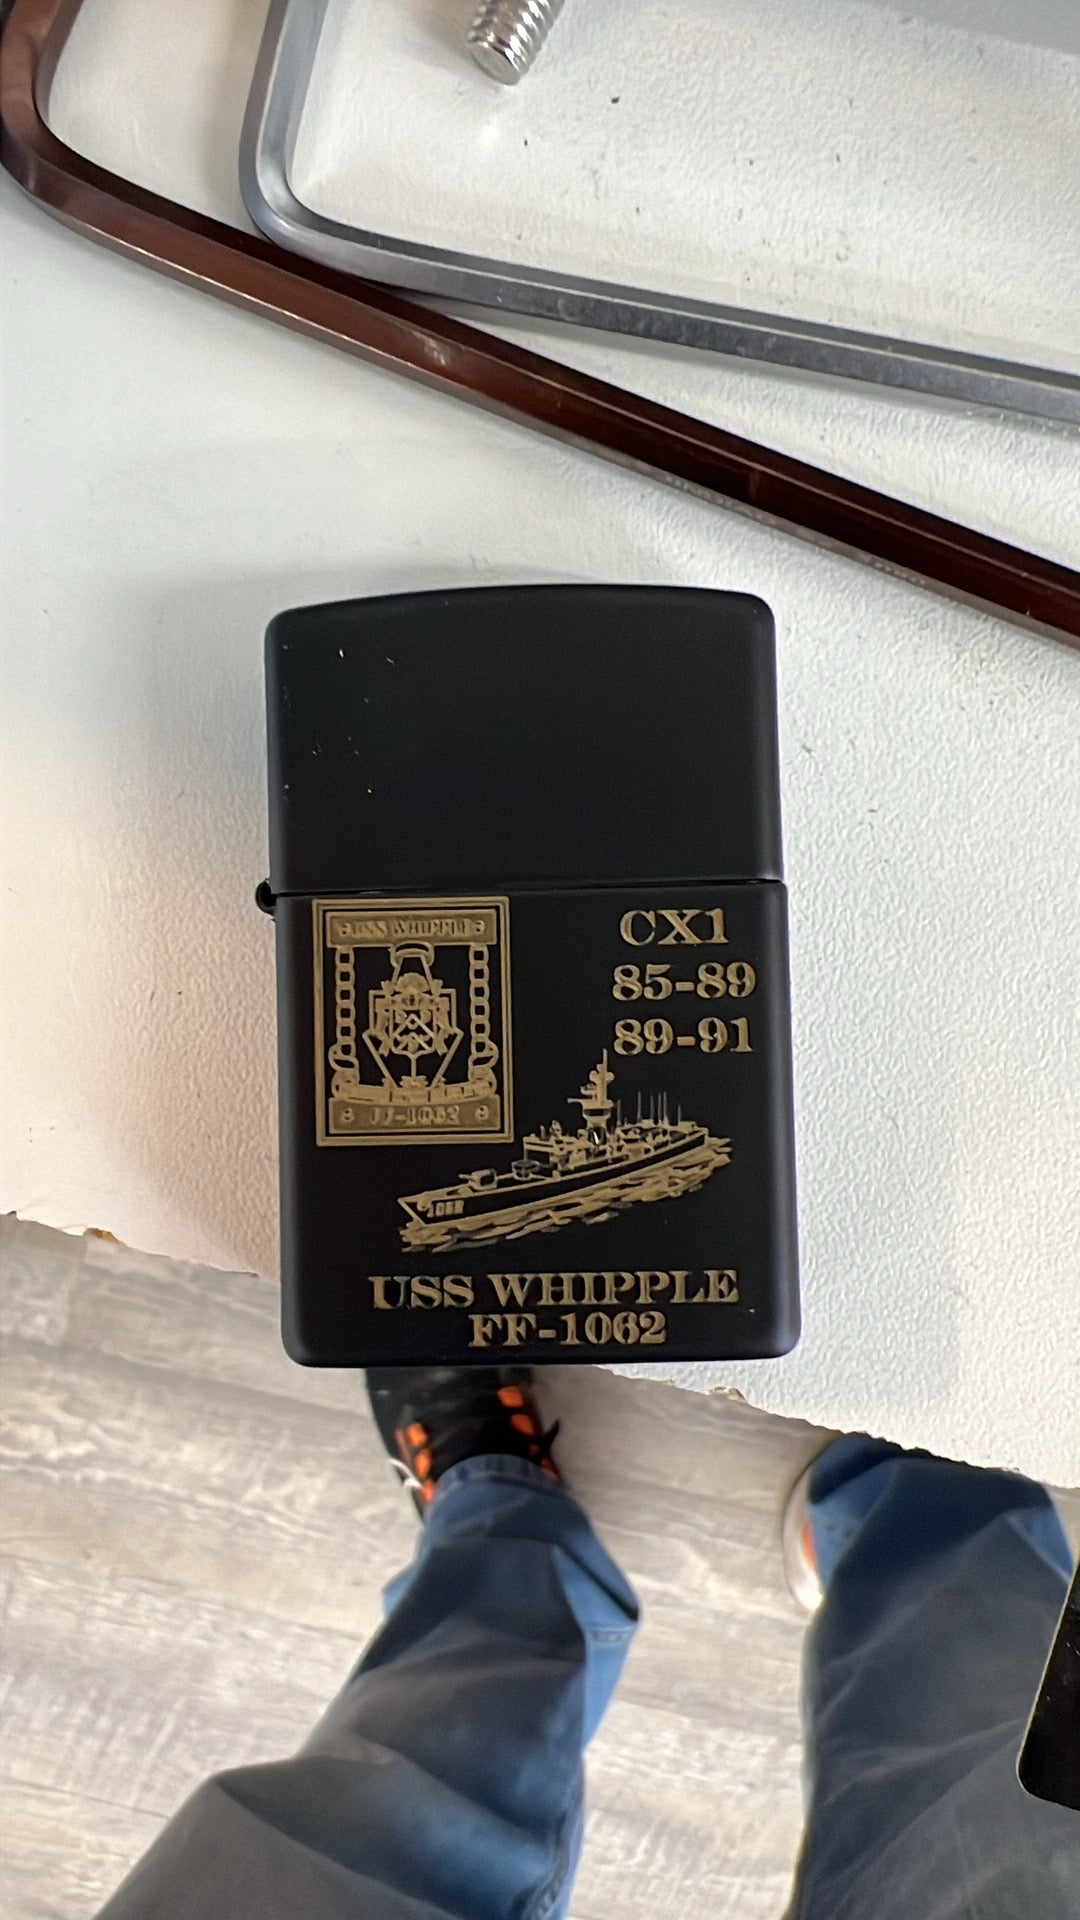 Hard to find ships zippo lighter personalized.